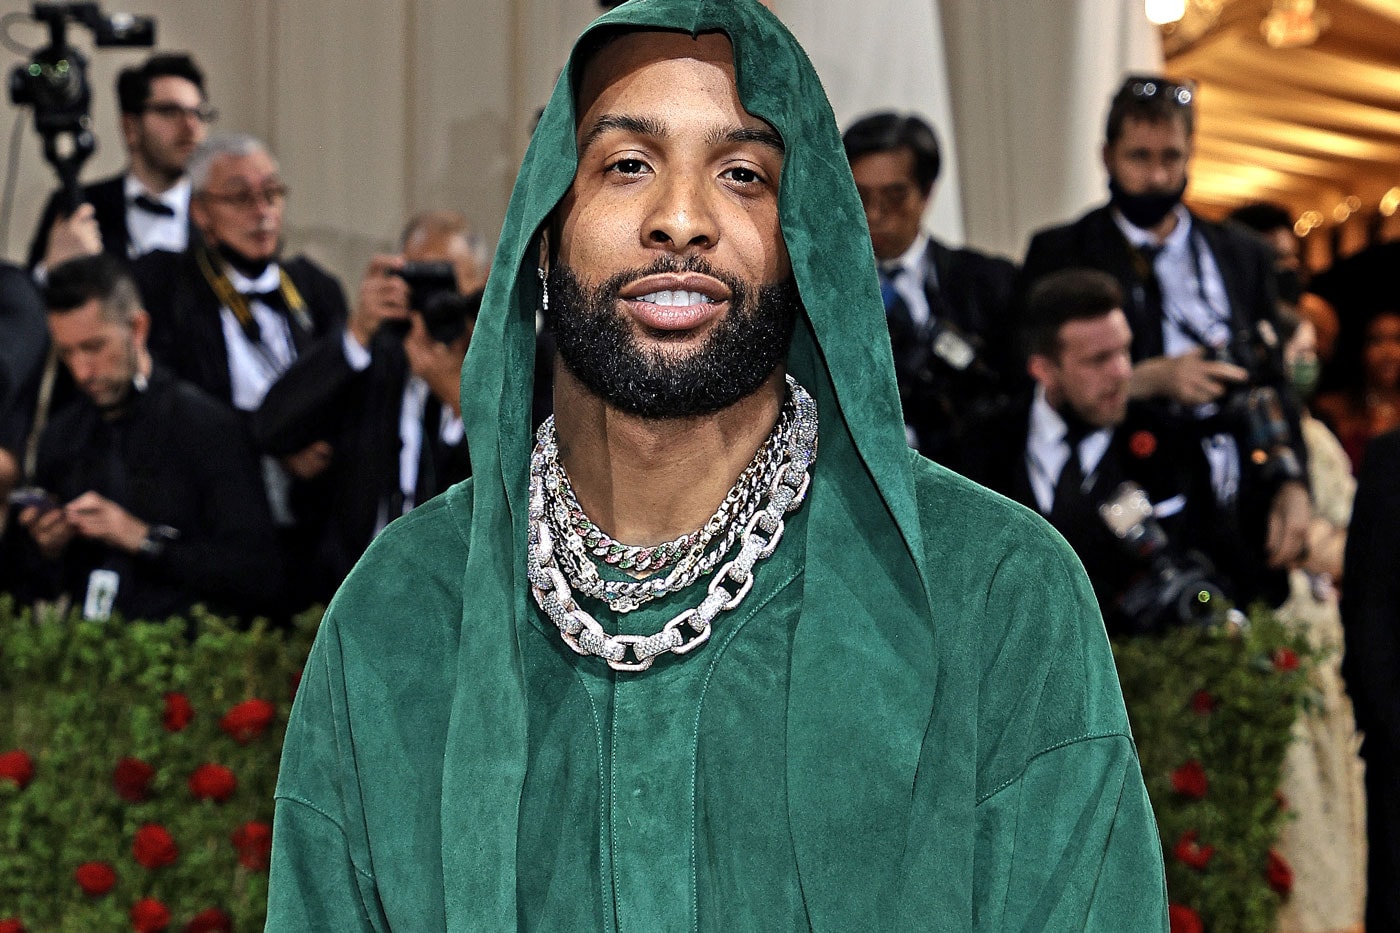 Odell Beckham Jr. Flexed an Iced Out $650K Chain at the Met Gala 2022 chrome hearts cactus plant flea market los angeles rams nfl american football